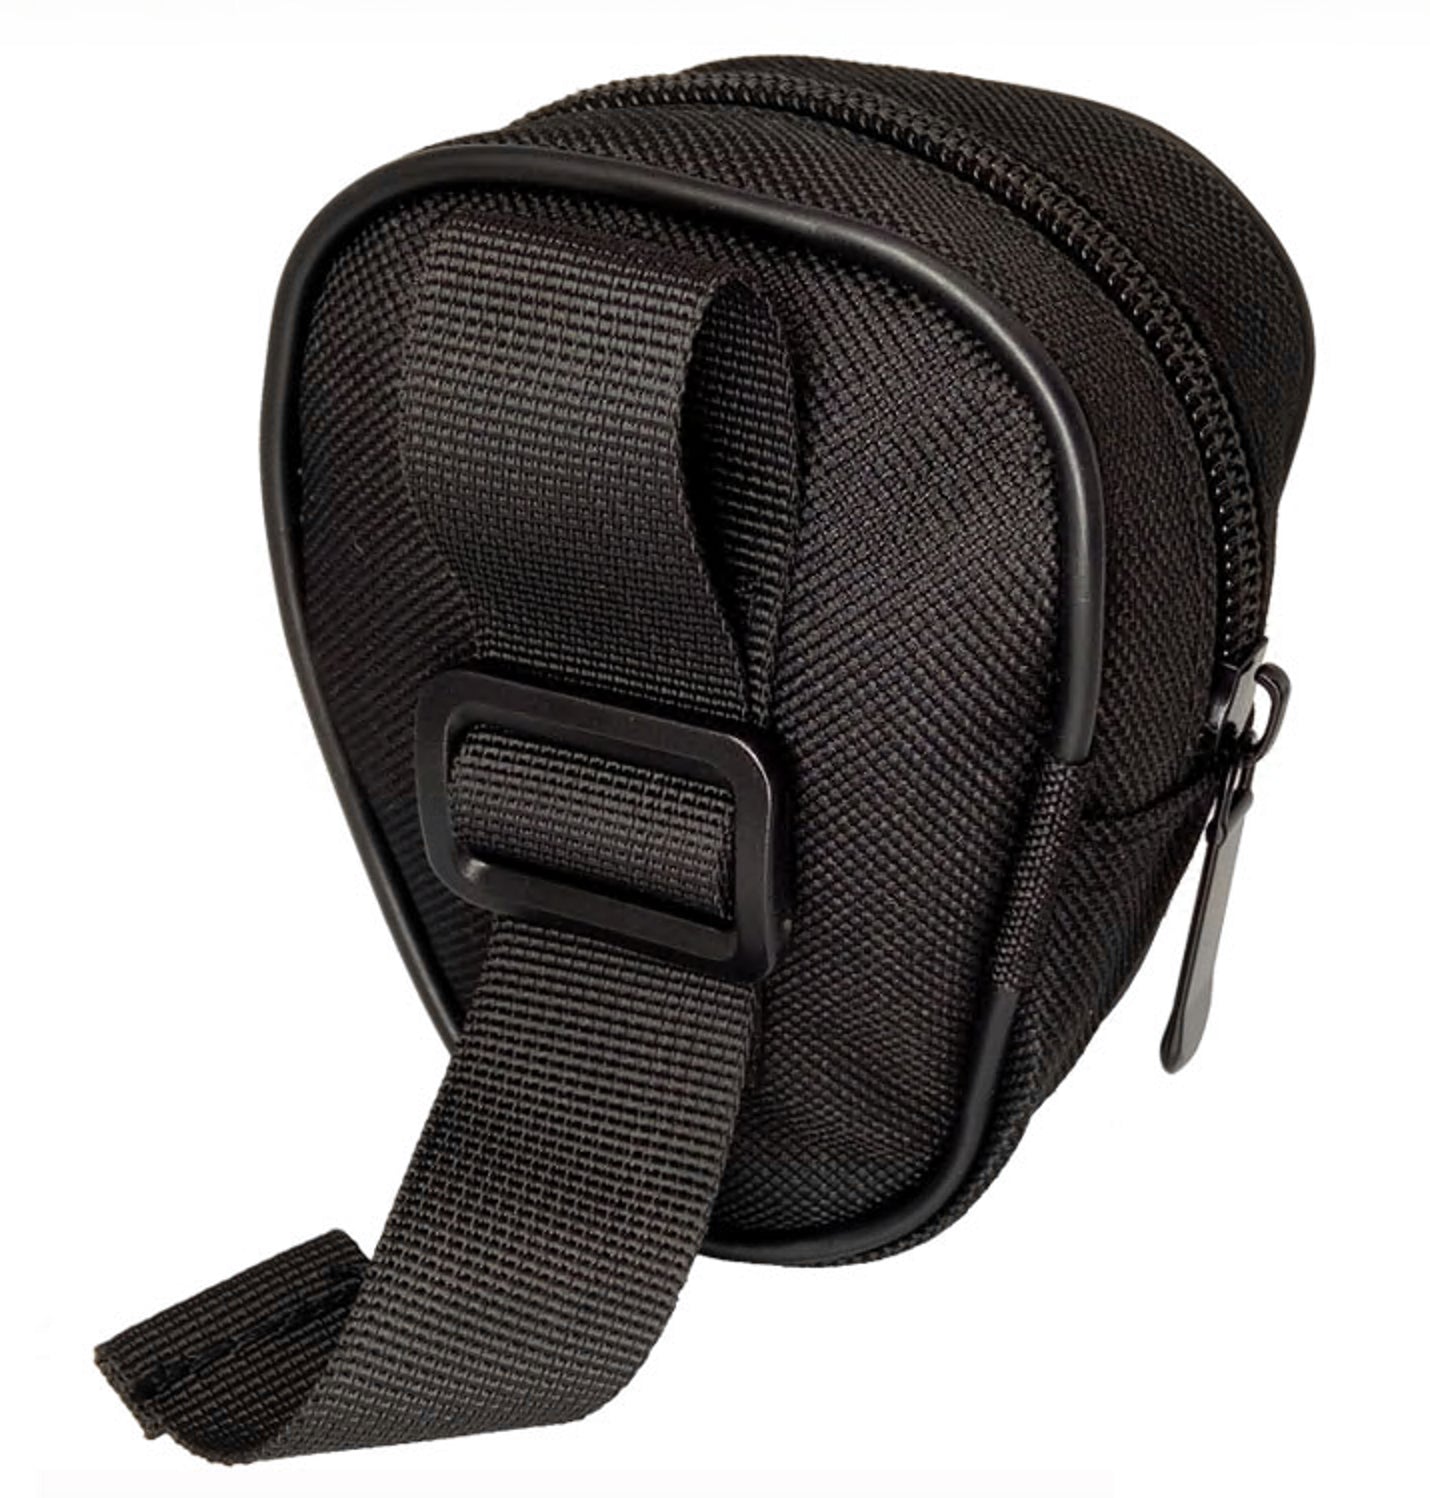 Kovix Carrying bag for disc and lever locks.